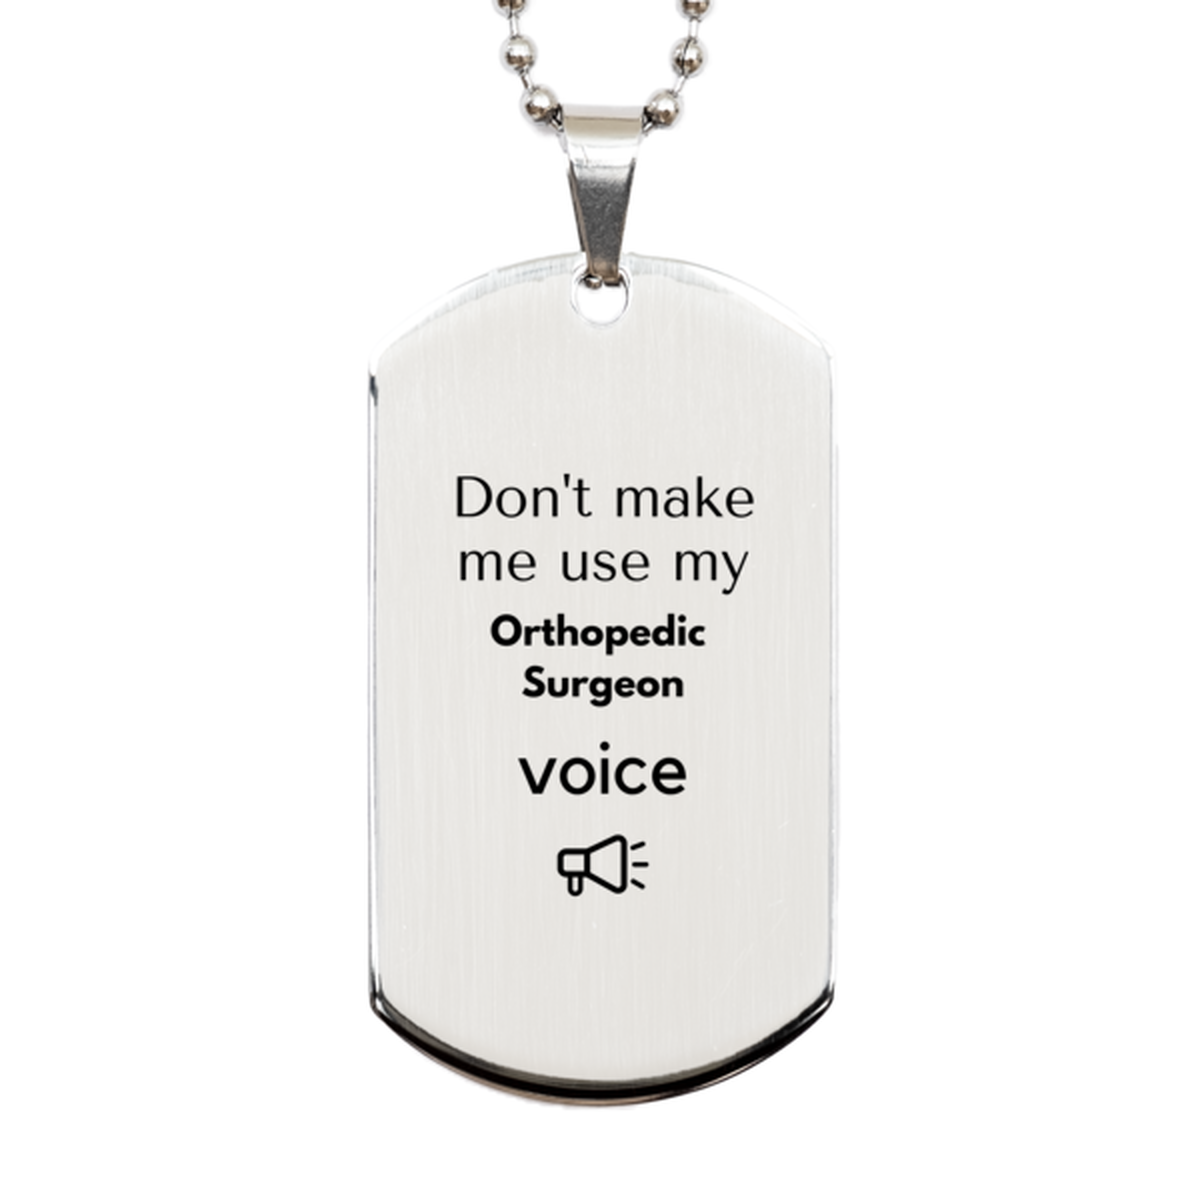 Don't make me use my Orthopedic Surgeon voice, Sarcasm Orthopedic Surgeon Gifts, Christmas Orthopedic Surgeon Silver Dog Tag Birthday Unique Gifts For Orthopedic Surgeon Coworkers, Men, Women, Colleague, Friends